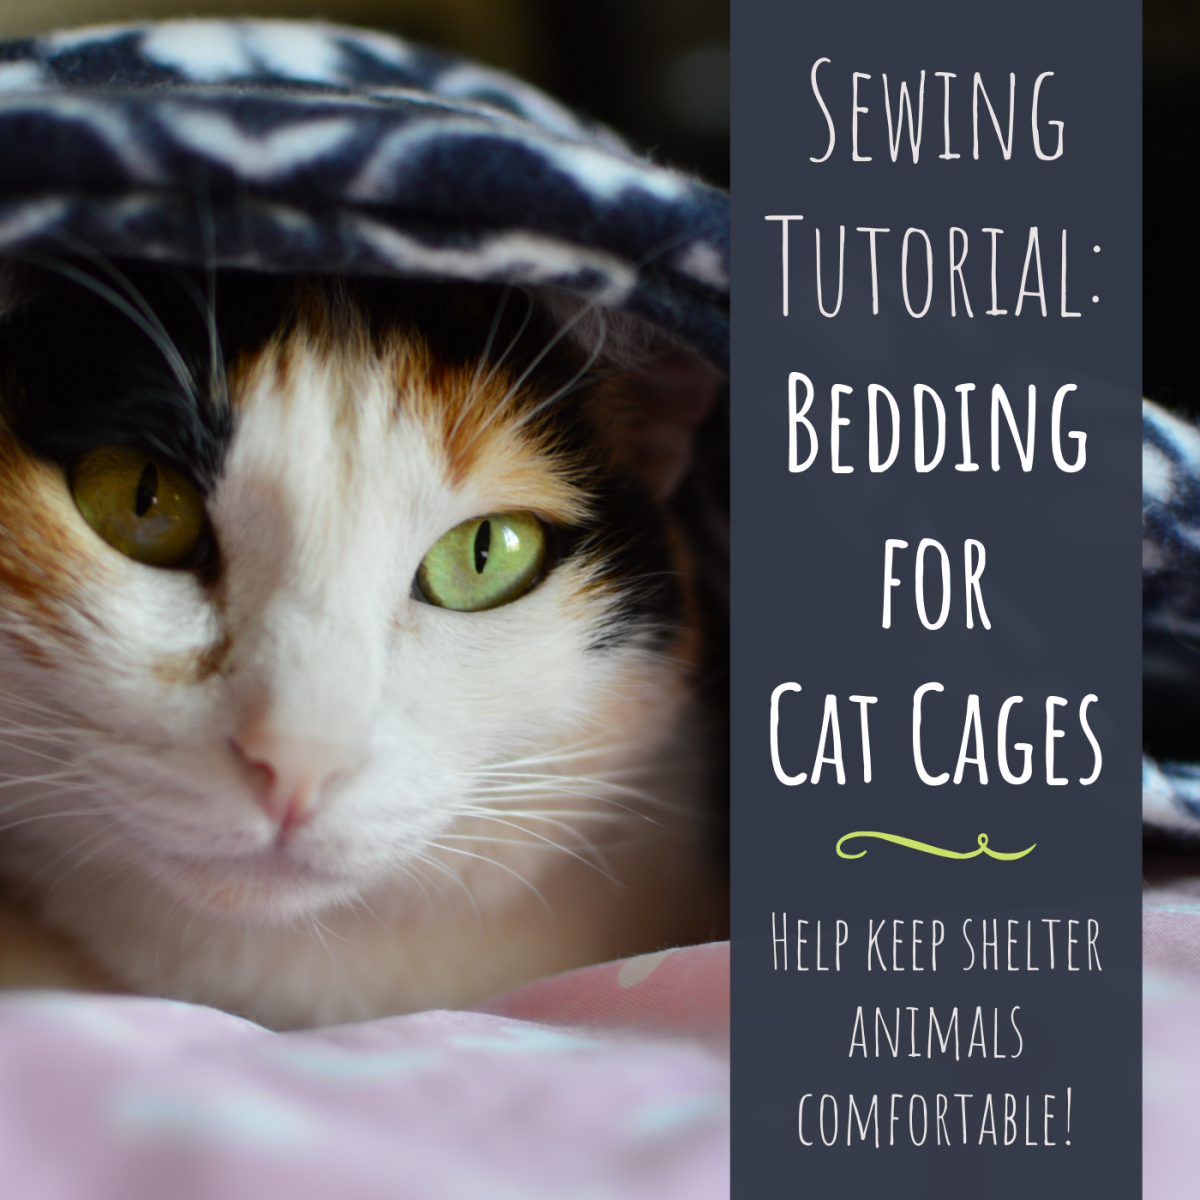 Learn how to sew cage mats or kennel pads to donate to animal shelters.